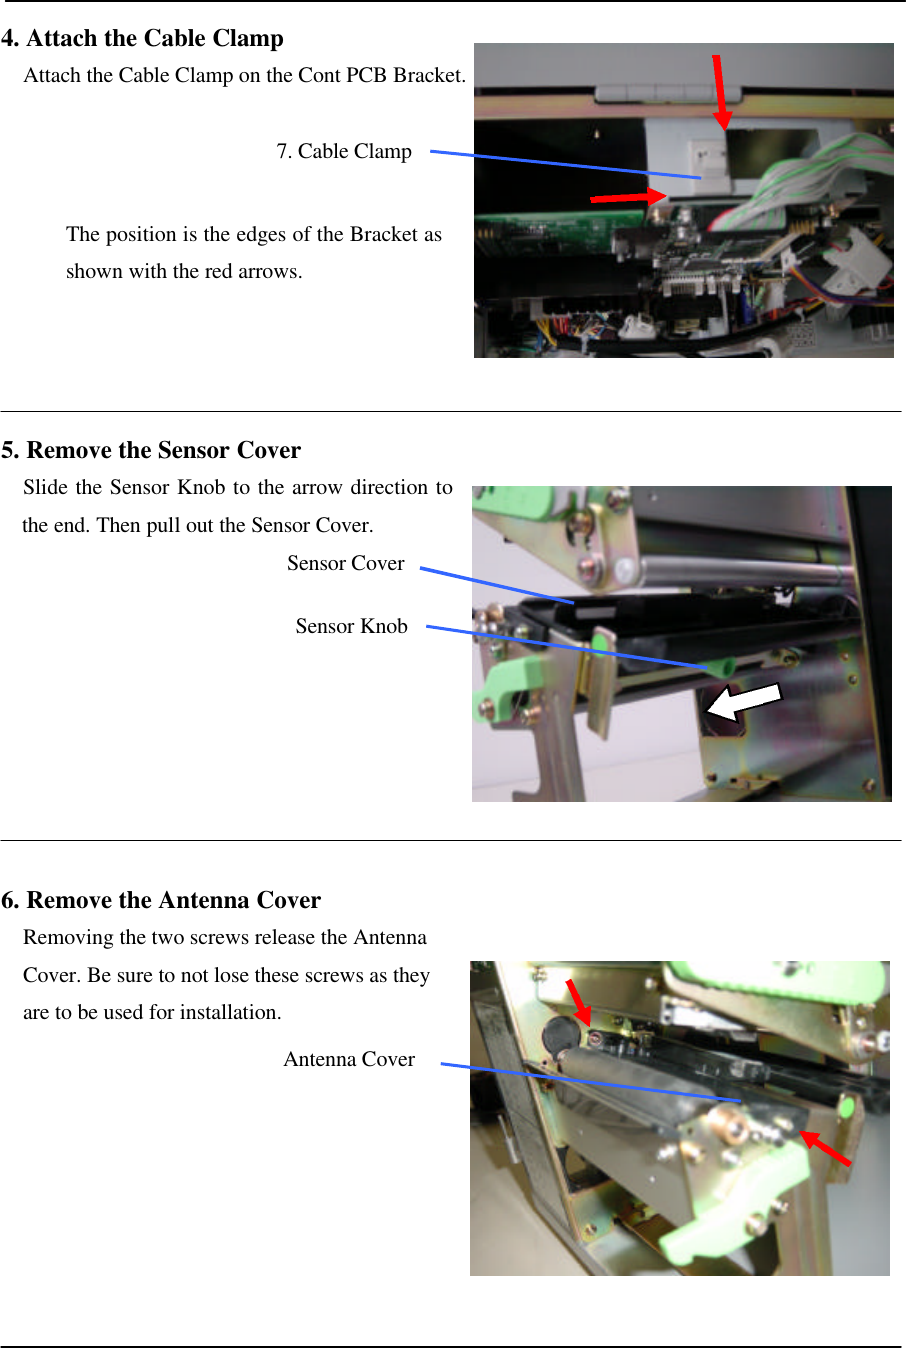  4. Attach the Cable Clamp Attach the Cable Clamp on the Cont PCB Bracket.          5. Remove the Sensor Cover Slide the Sensor Knob to the arrow direction to the end. Then pull out the Sensor Cover.          6. Remove the Antenna Cover Removing the two screws release the Antenna Cover. Be sure to not lose these screws as they are to be used for installation.             Sensor Cover Antenna Cover 7. Cable Clamp The position is the edges of the Bracket as shown with the red arrows. Sensor Knob 